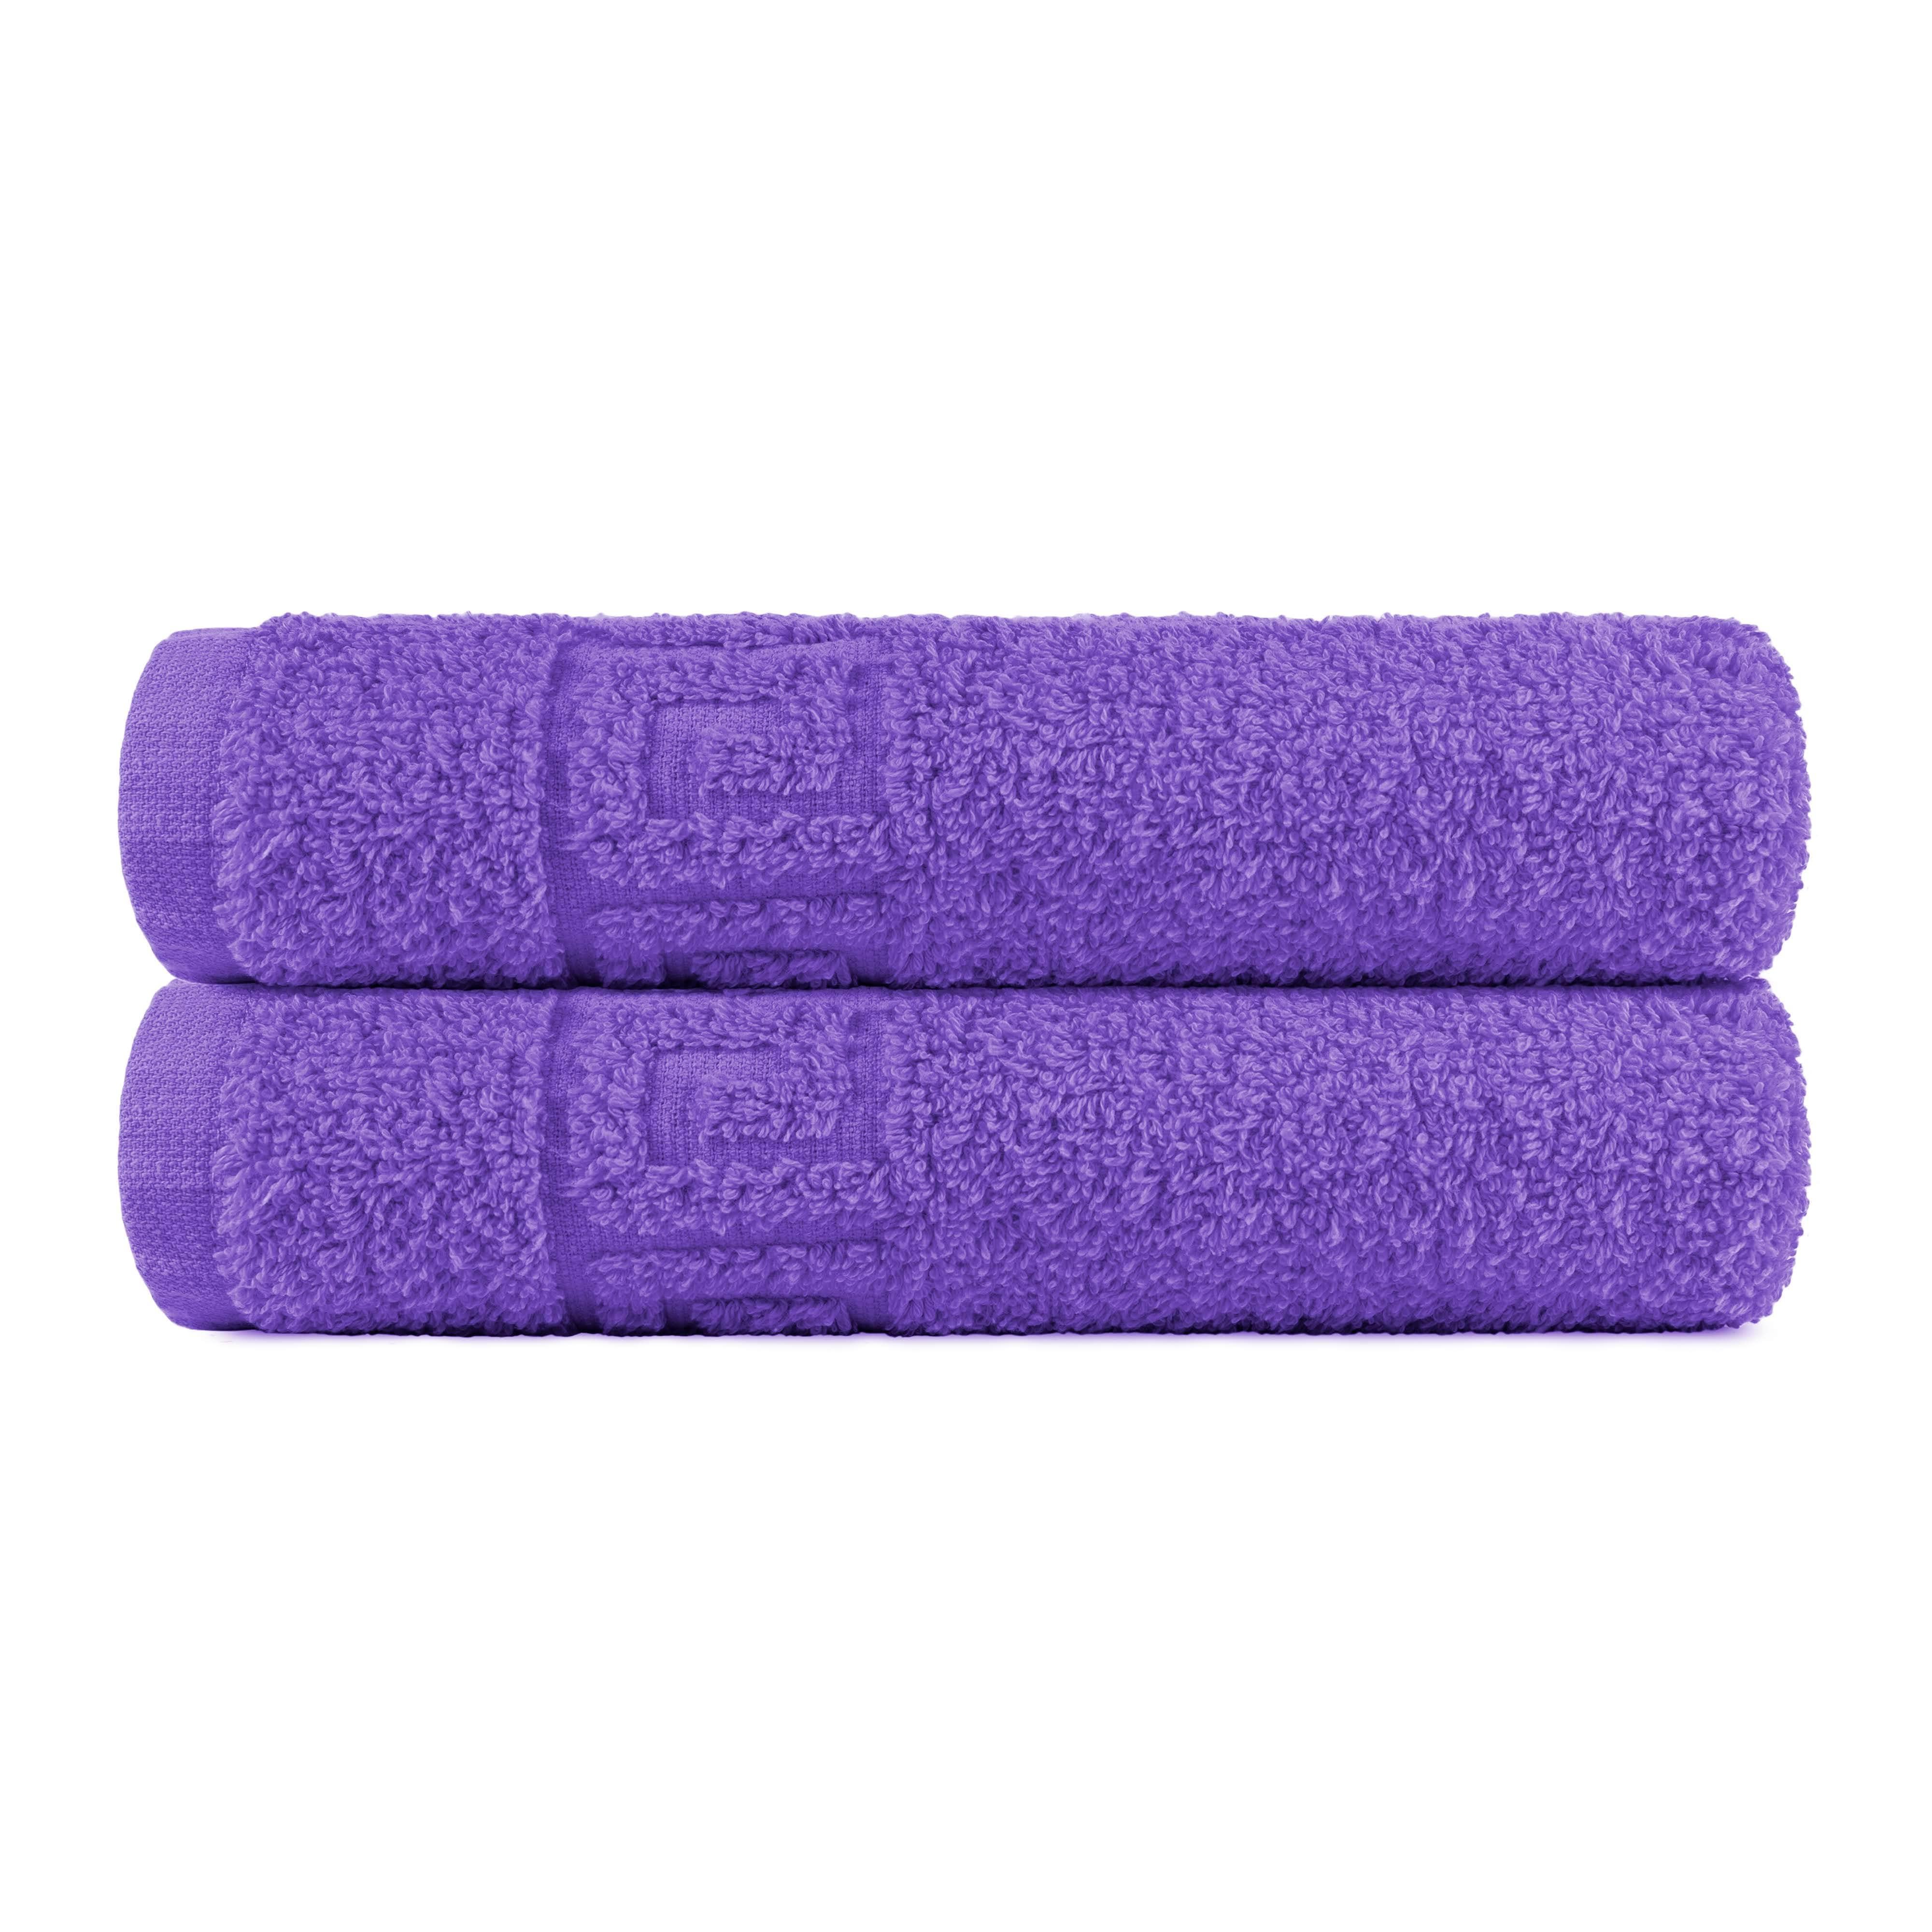 2 Piece 100% Cotton Hand/Bath Towel with Color Options - Context USA - Towel by Context